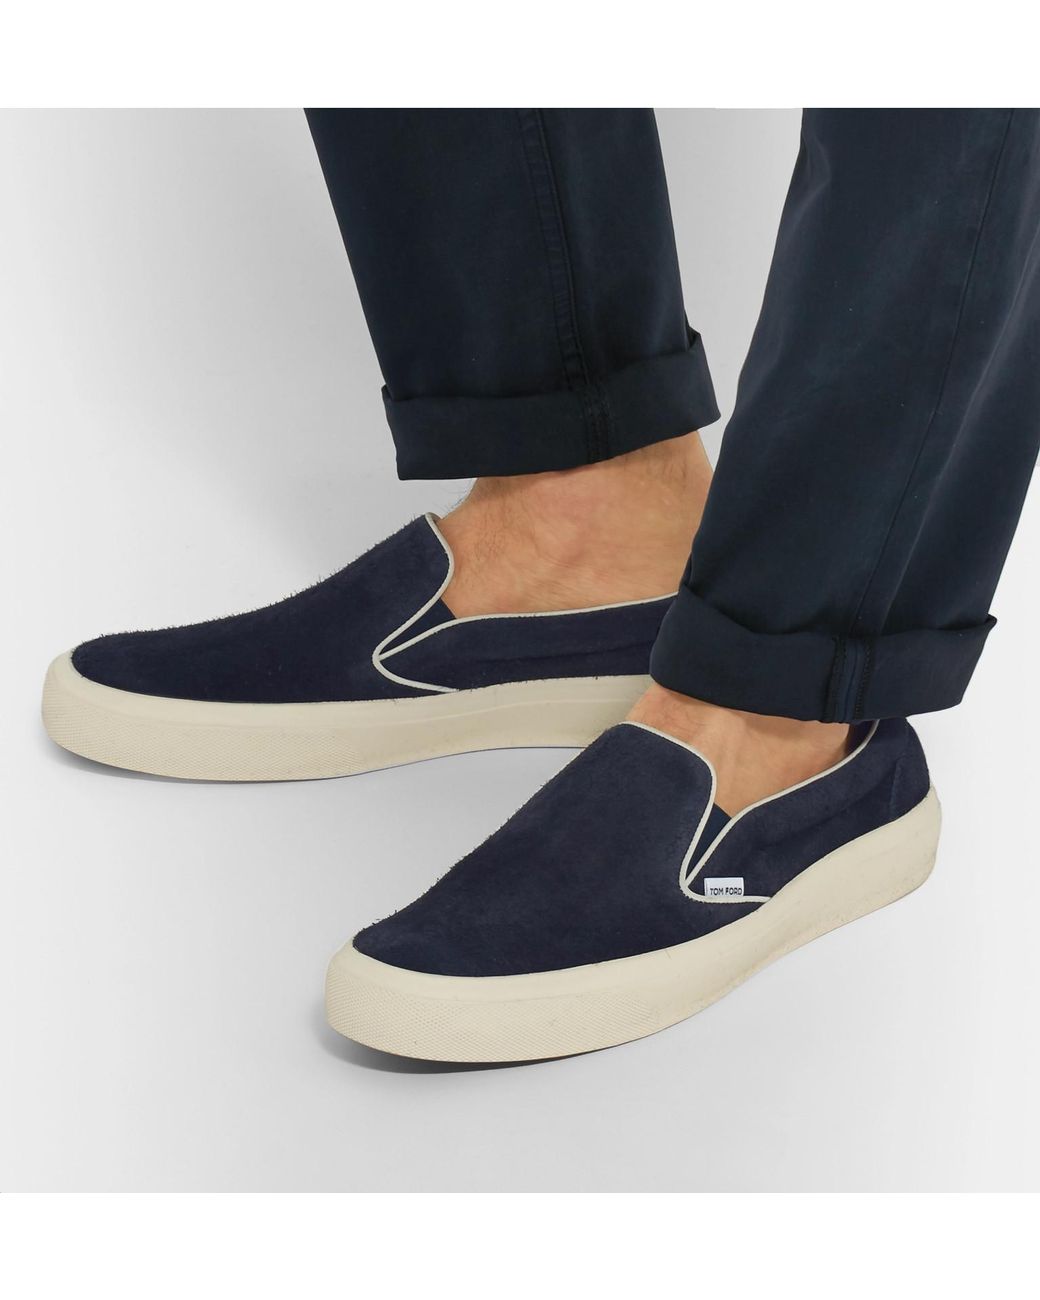 TOM FORD Jude Suede Slip-On Sneakers for Men